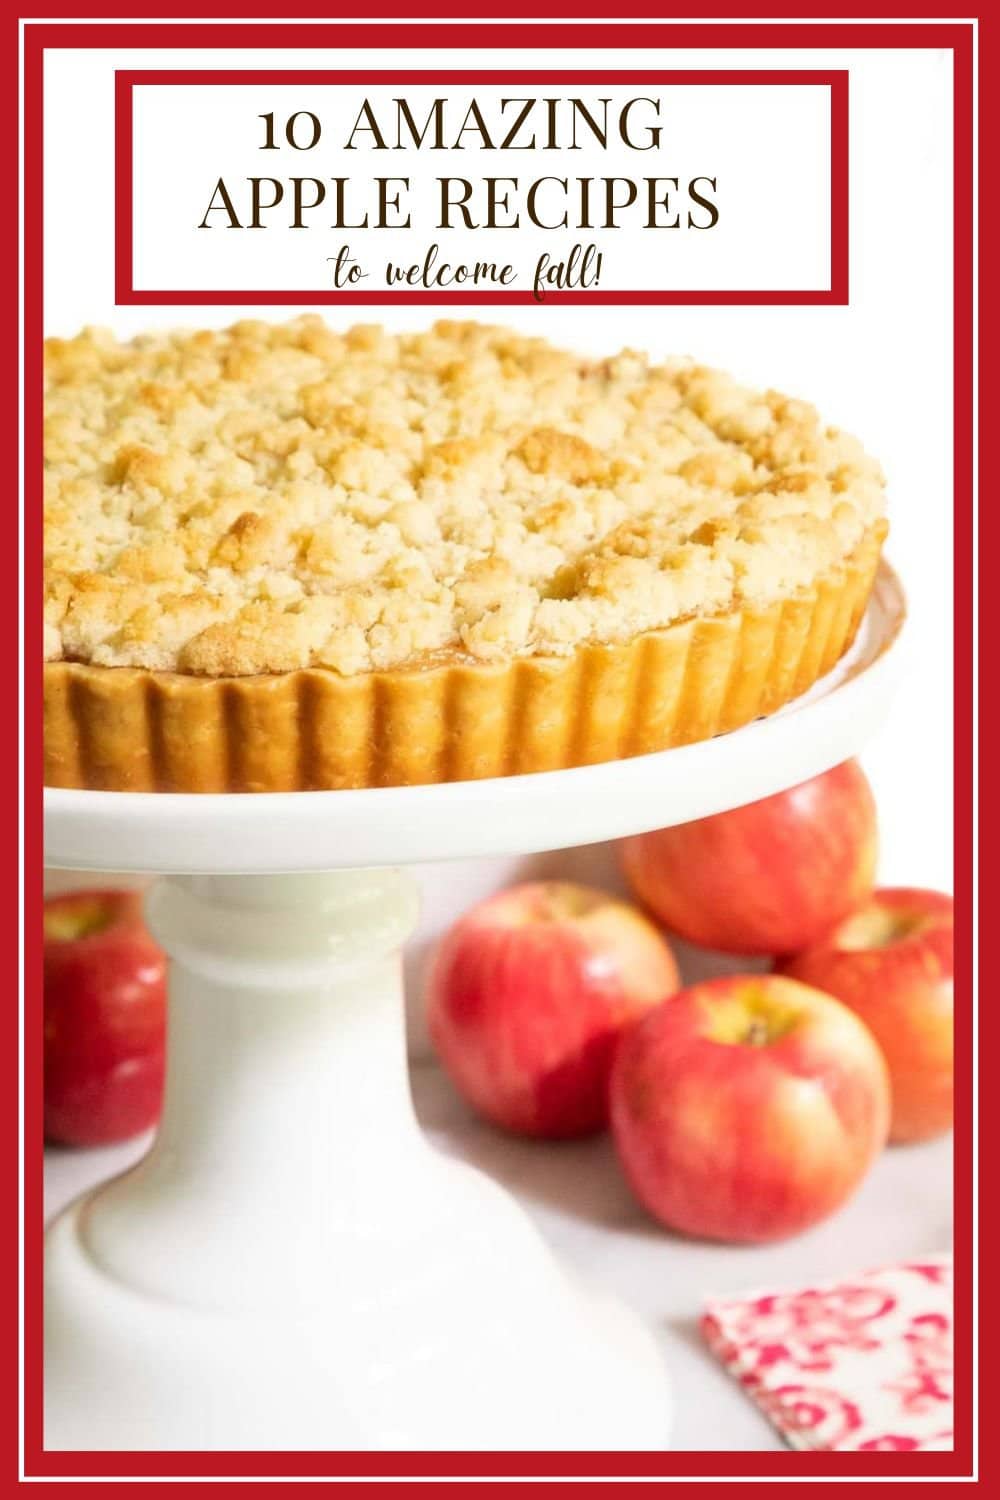 Welcome Fall with 10 Easy, Delicious Apple Recipes!